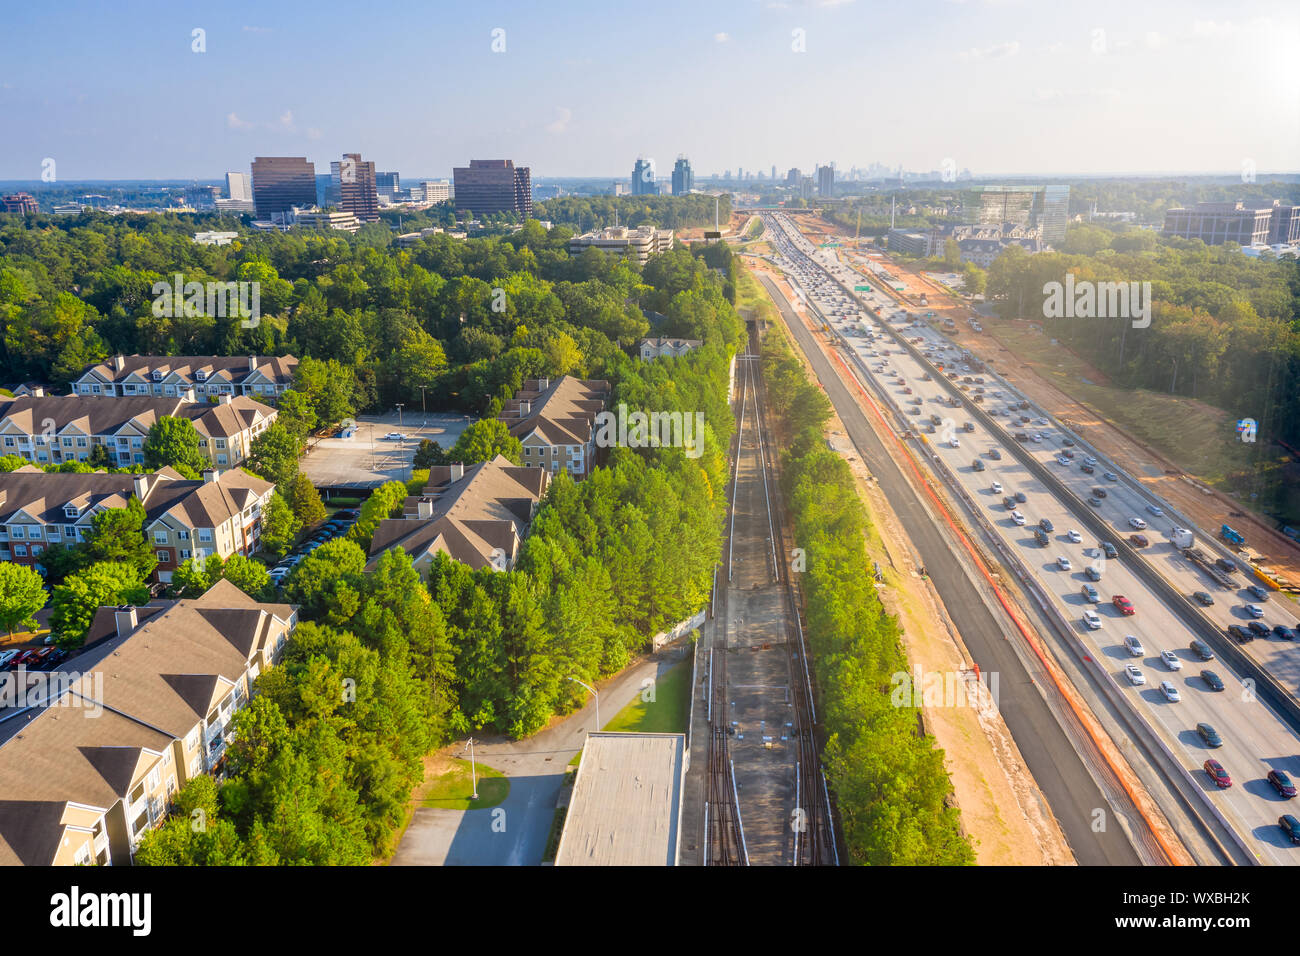 Condos in Atlanta suburbs just next to Highway GA 400 during expansion construction project Stock Photo